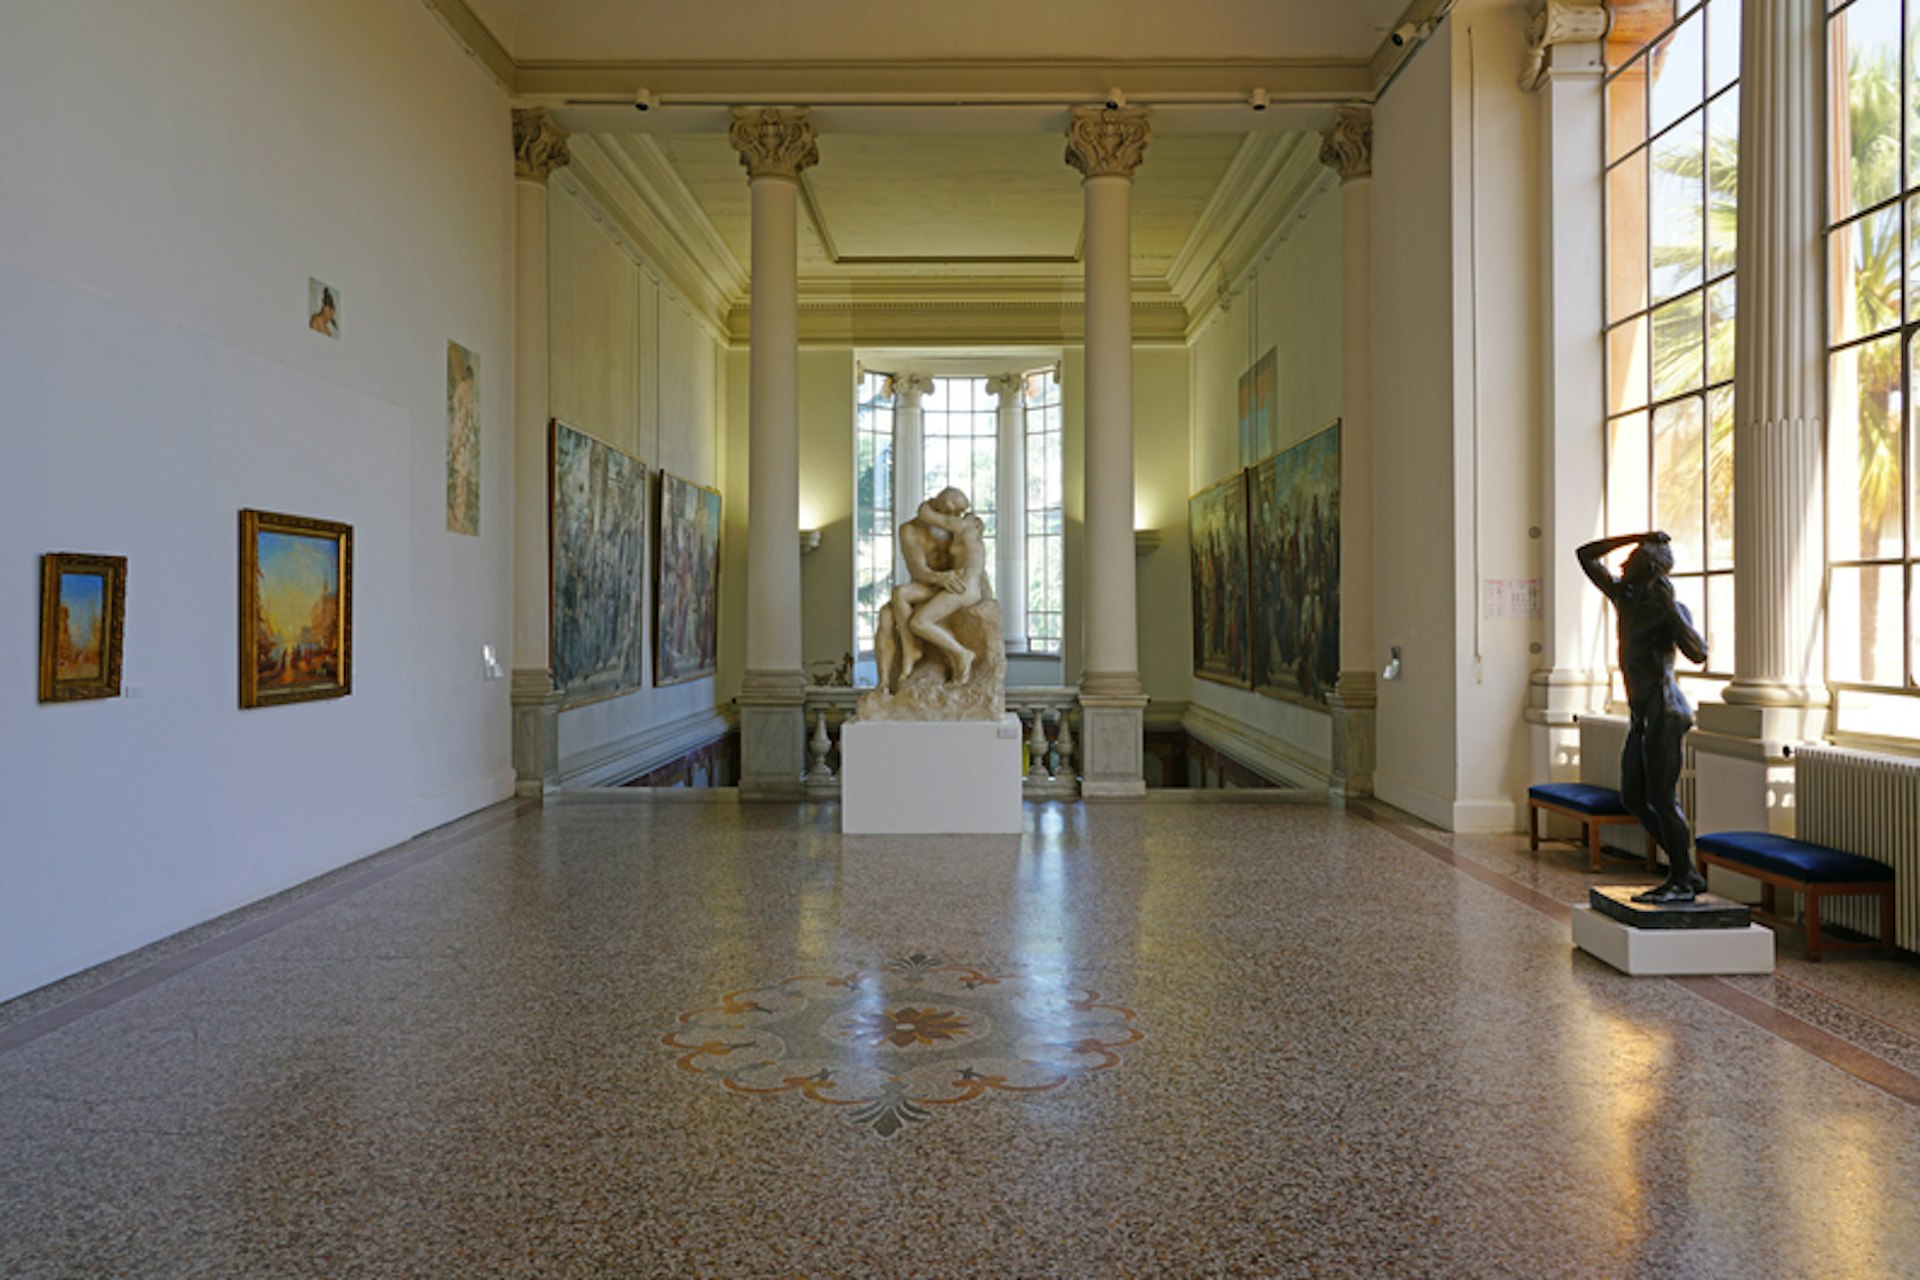 The interior corridor of an art gallery with a large sculpture of two people kissing at the end of the hallway